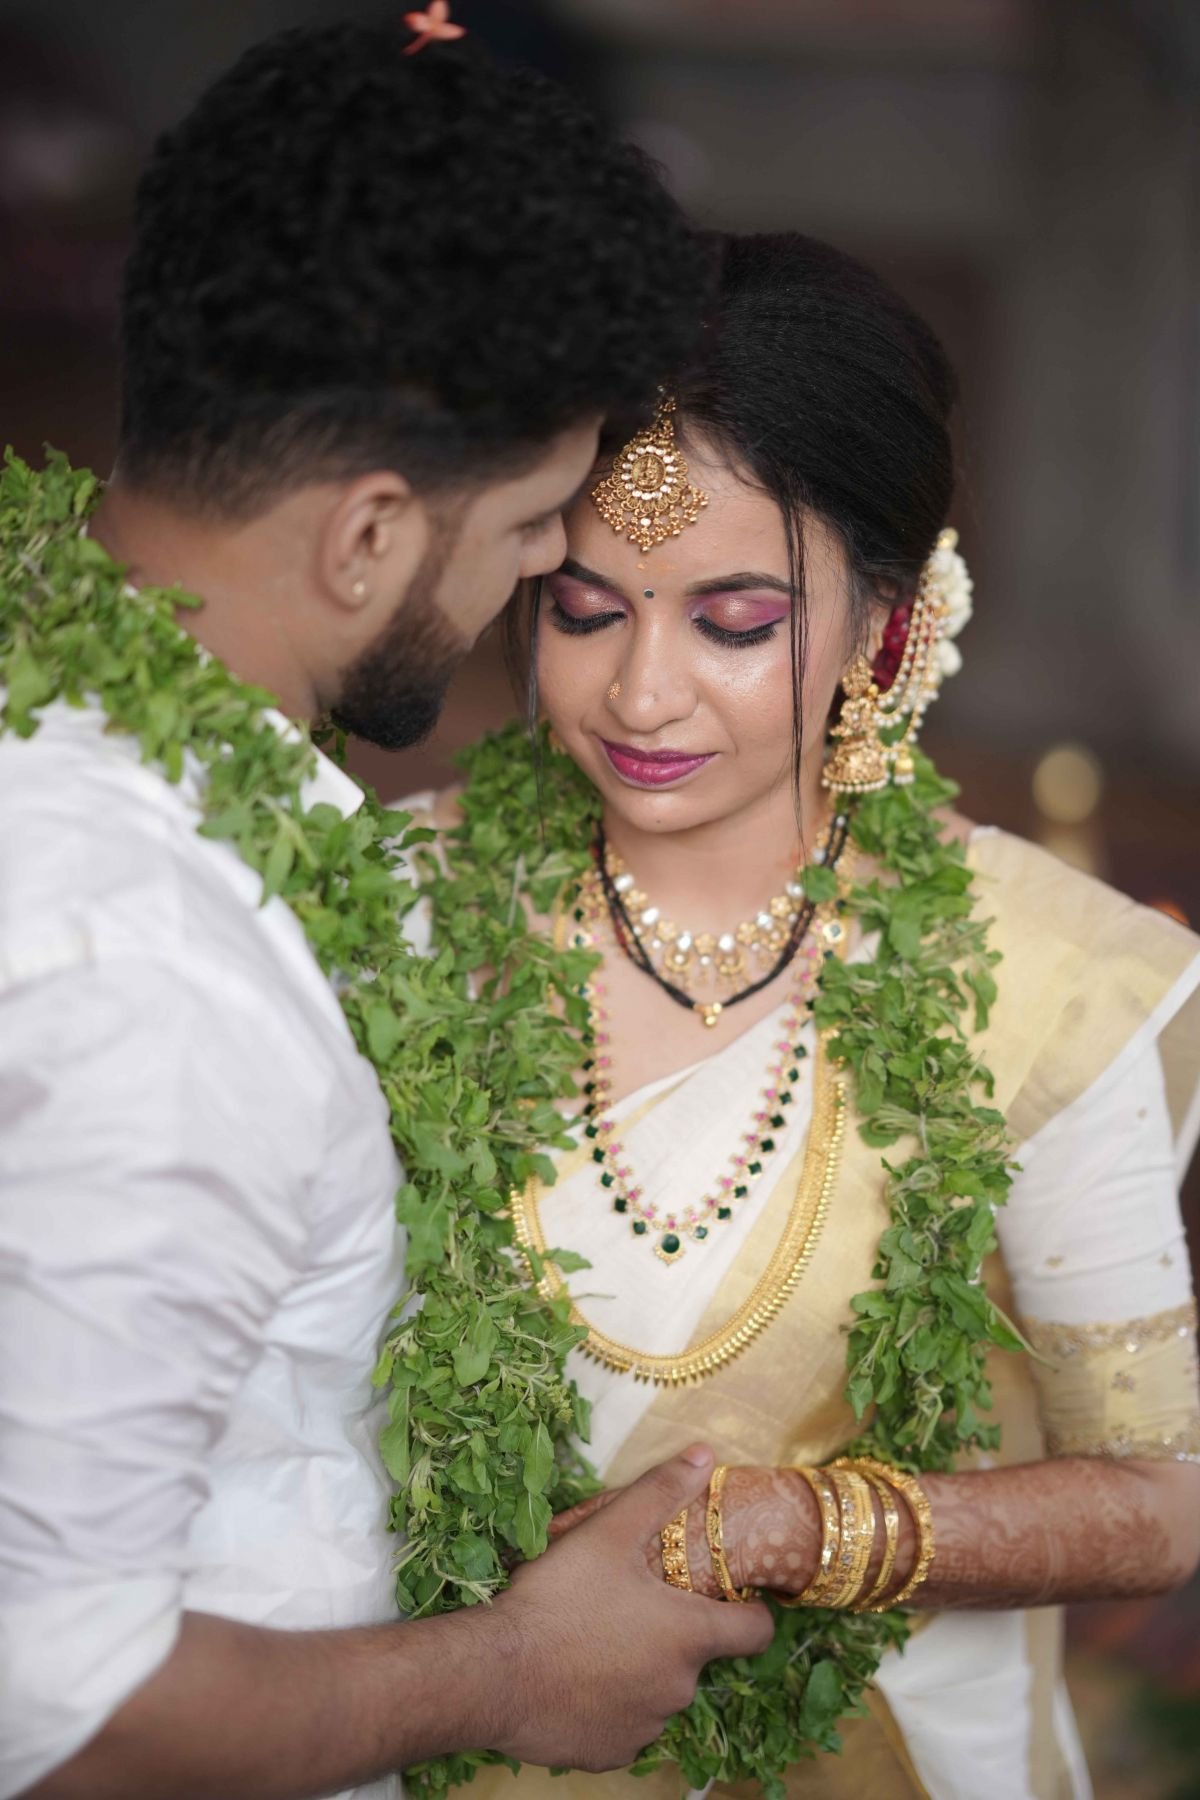 Revel In The Spiritual Richness Of A Traditional Hindu Wedding.